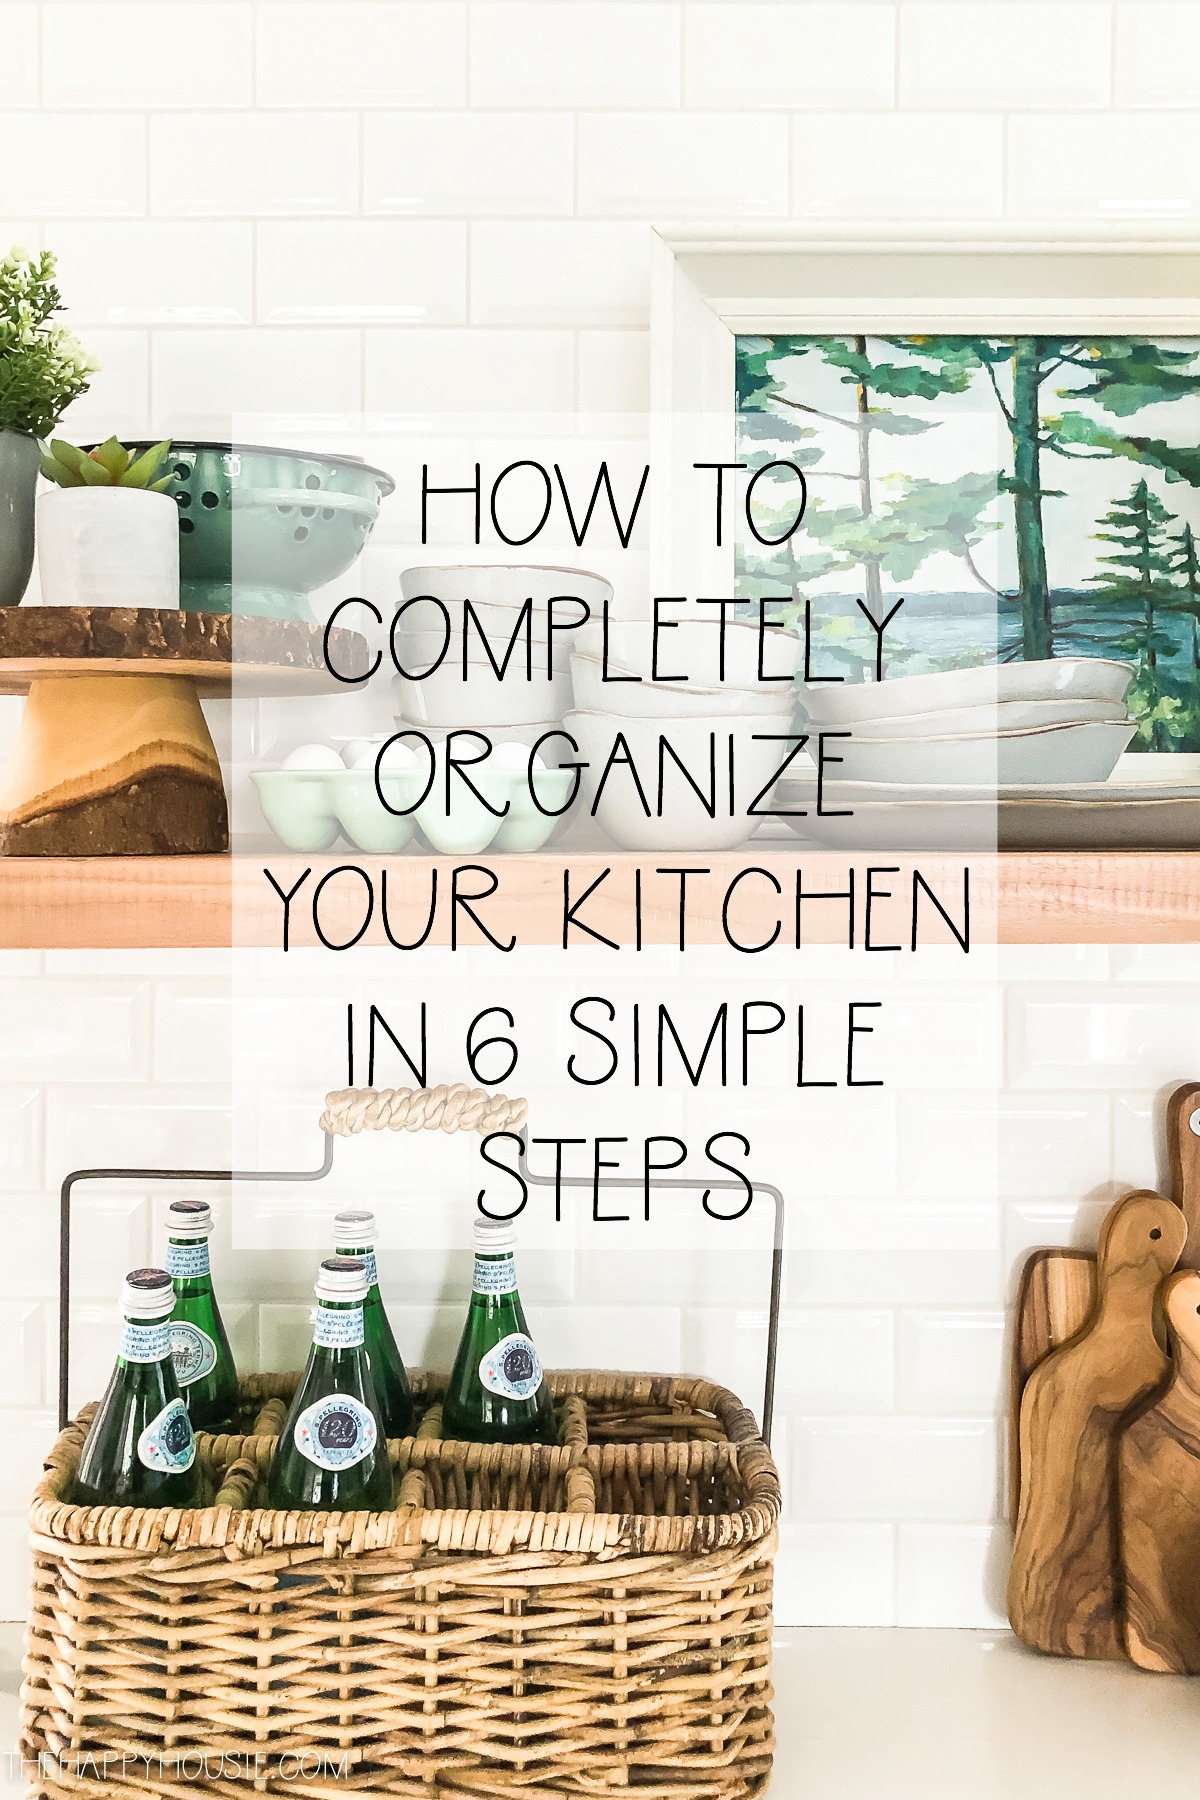 How To Organize Your Kitchen graphic.